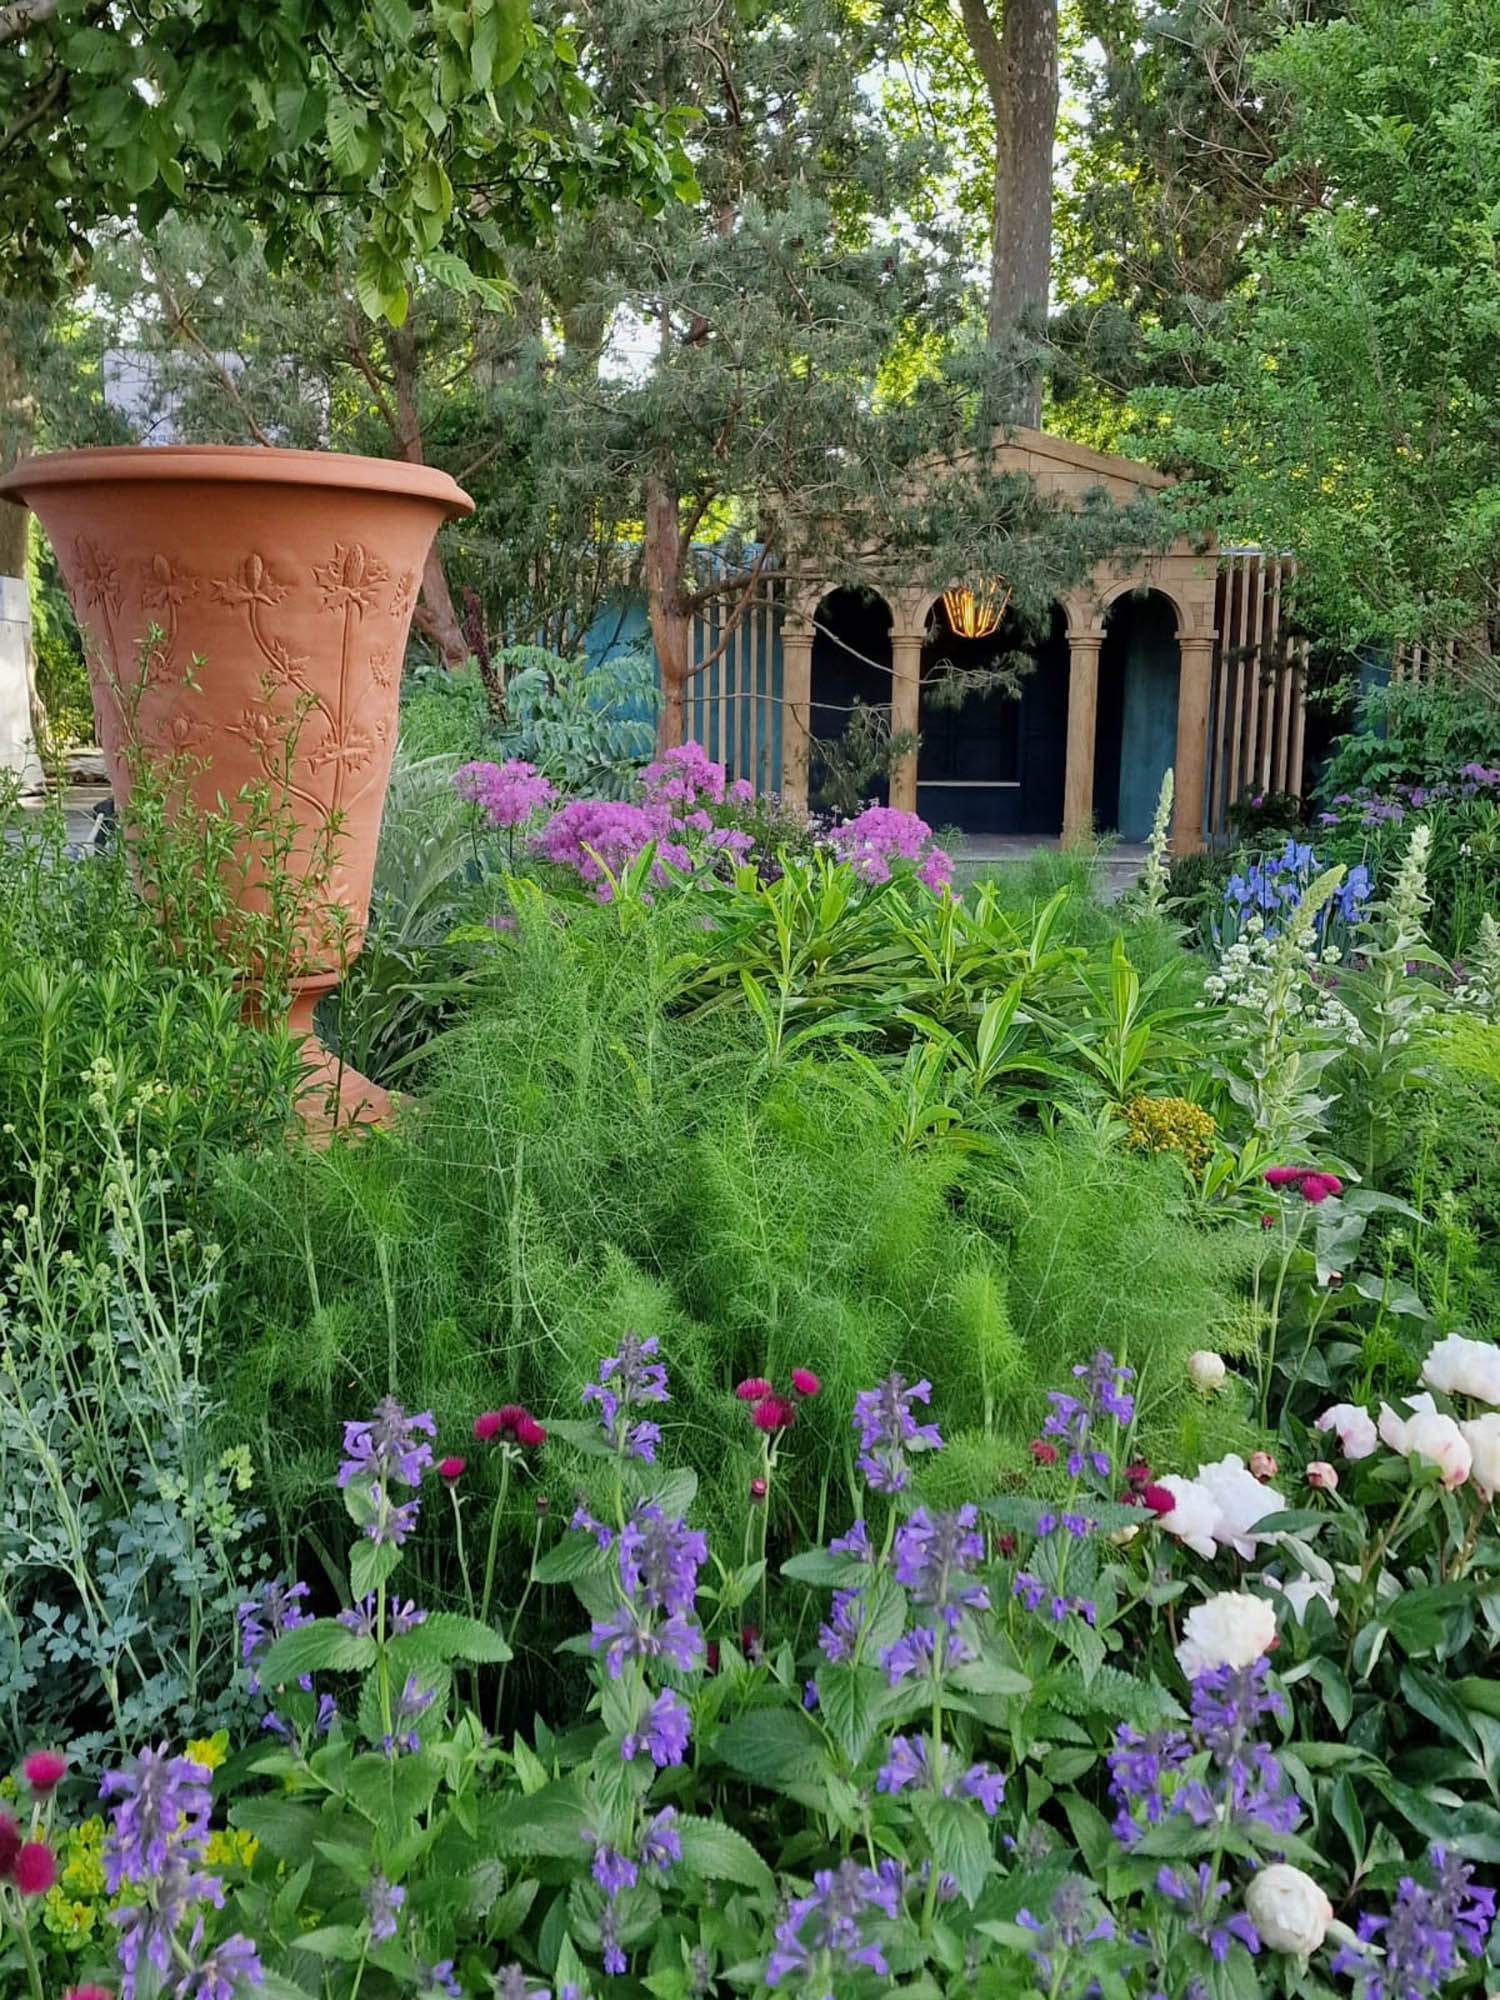 Charity garden for RNLI at Chelsea flower show 2022 is filled with wild flowers and herbs, beautiful stone pots and planters and a garden pavilion creating a sanctuary in the centre